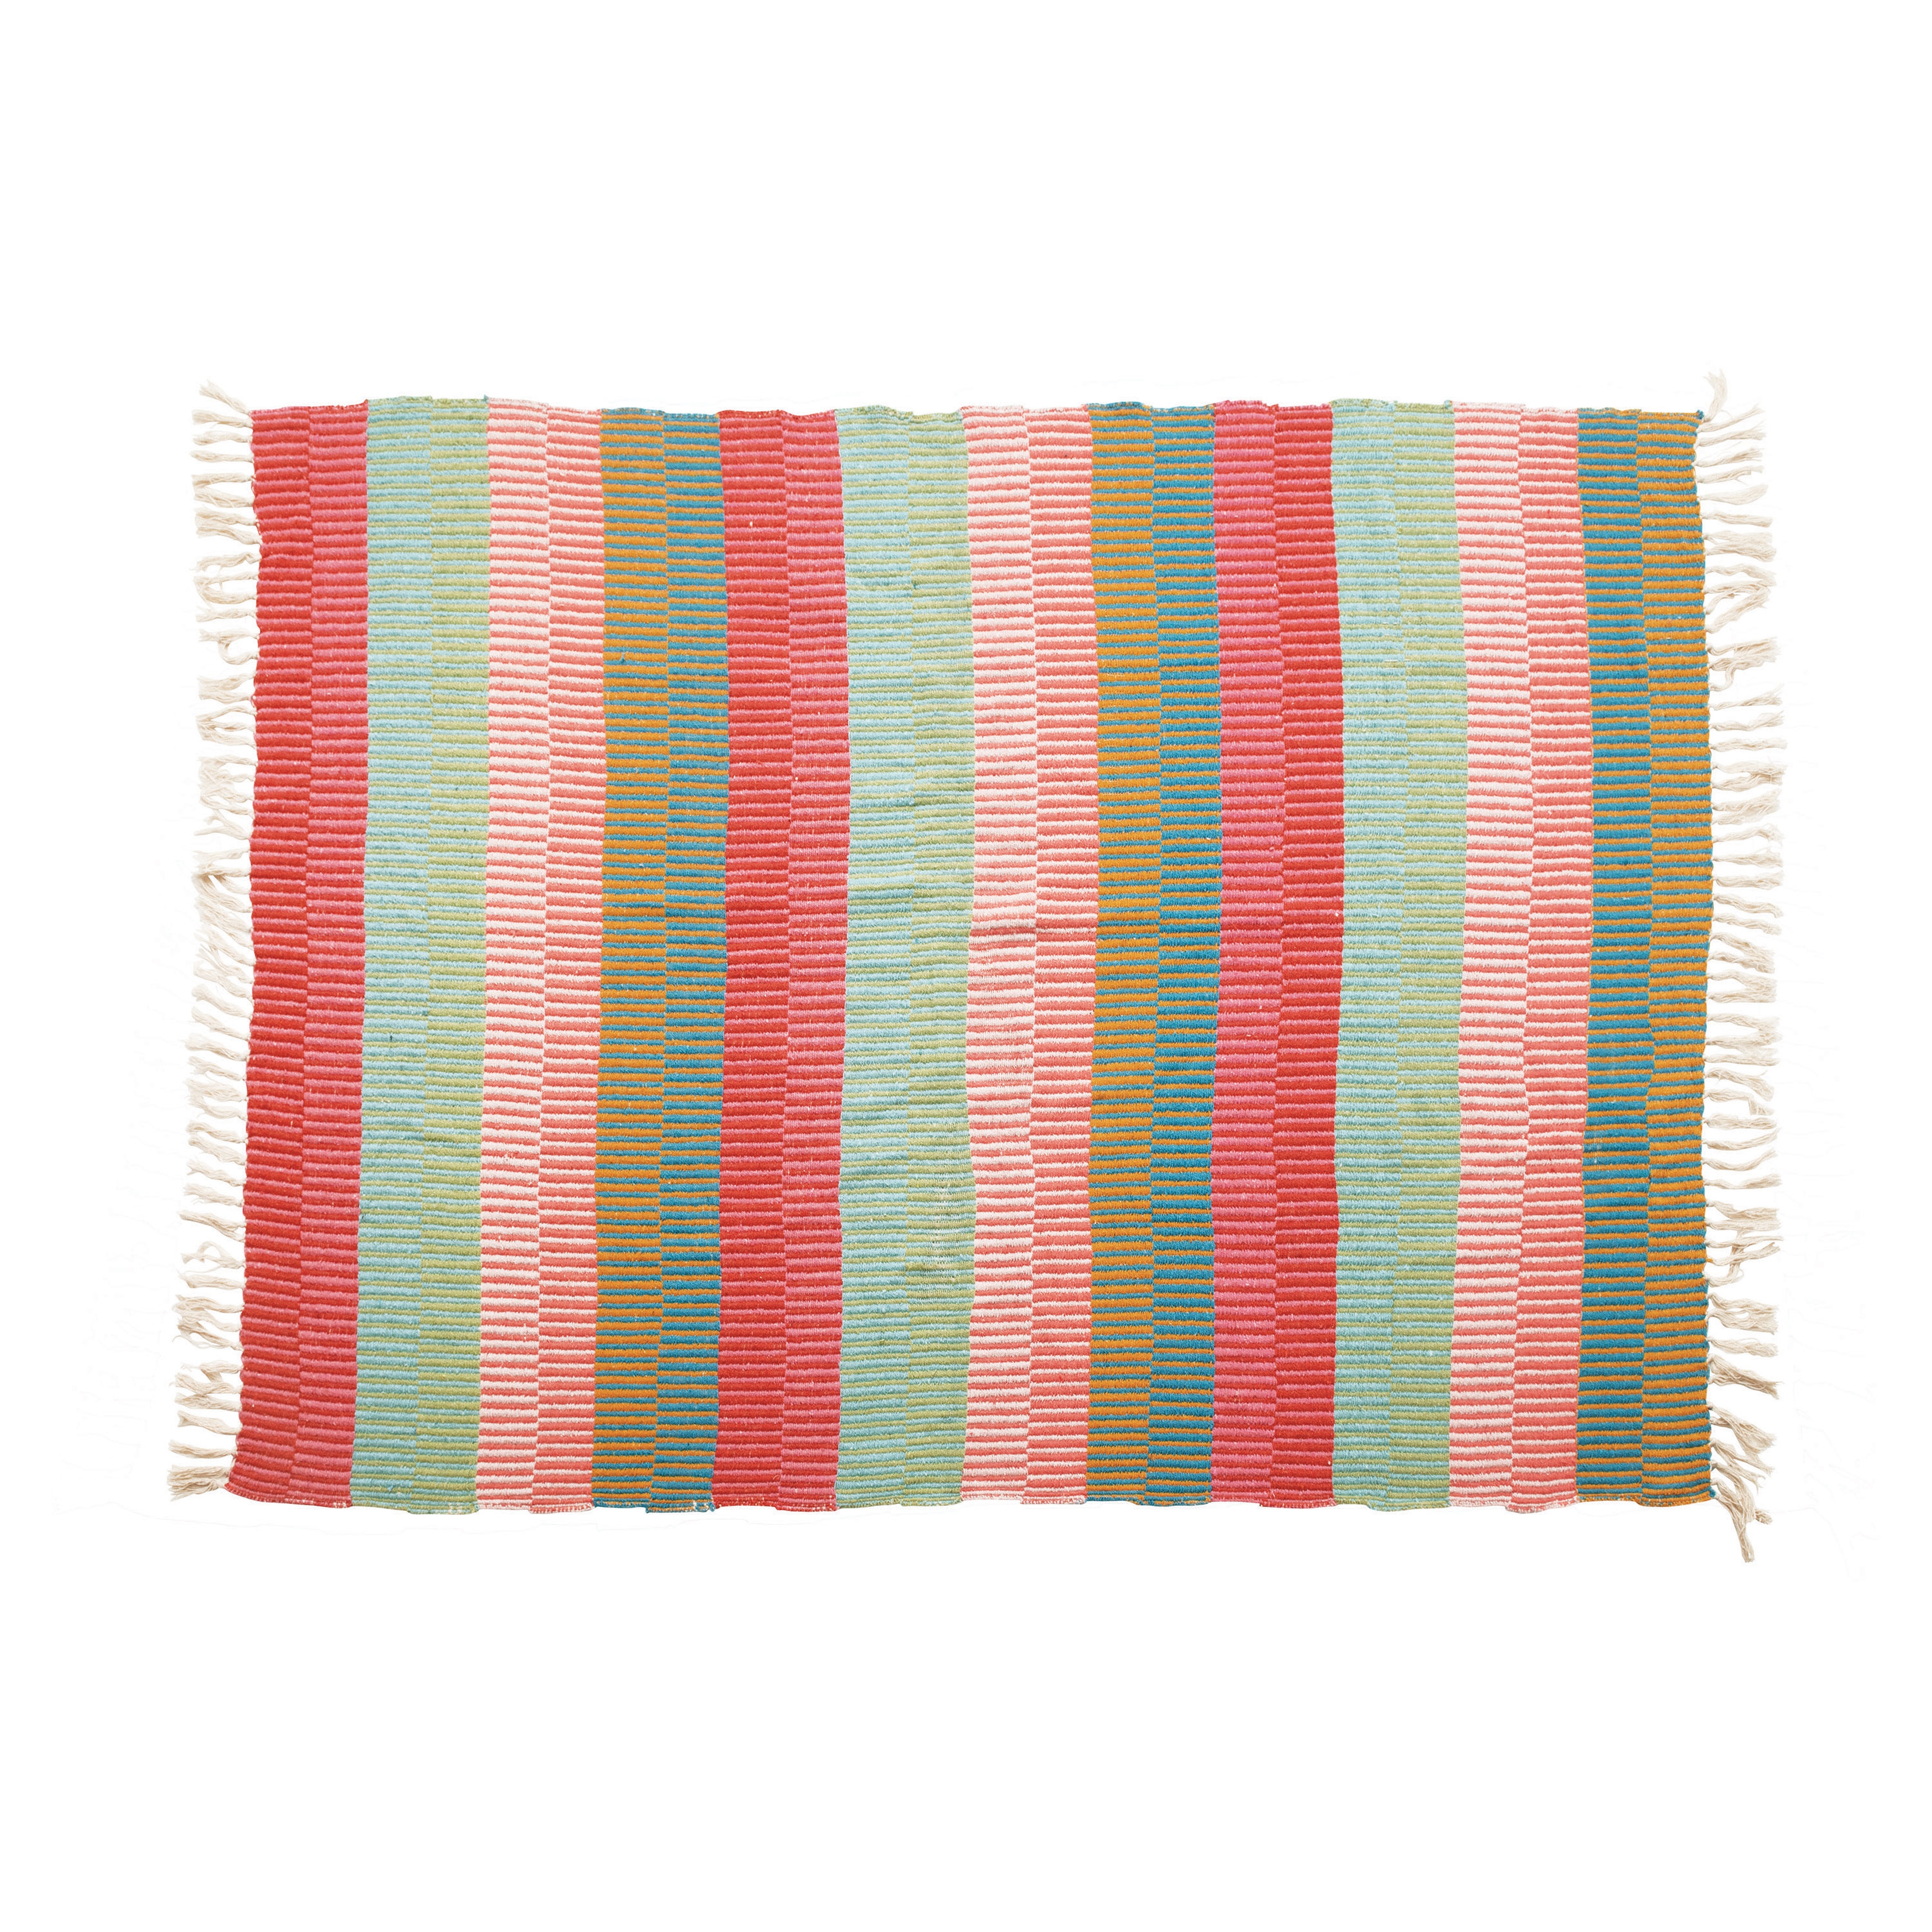 Woven Recycled Cotton Blend Striped Throw with Tassels, Multi Color - Image 0